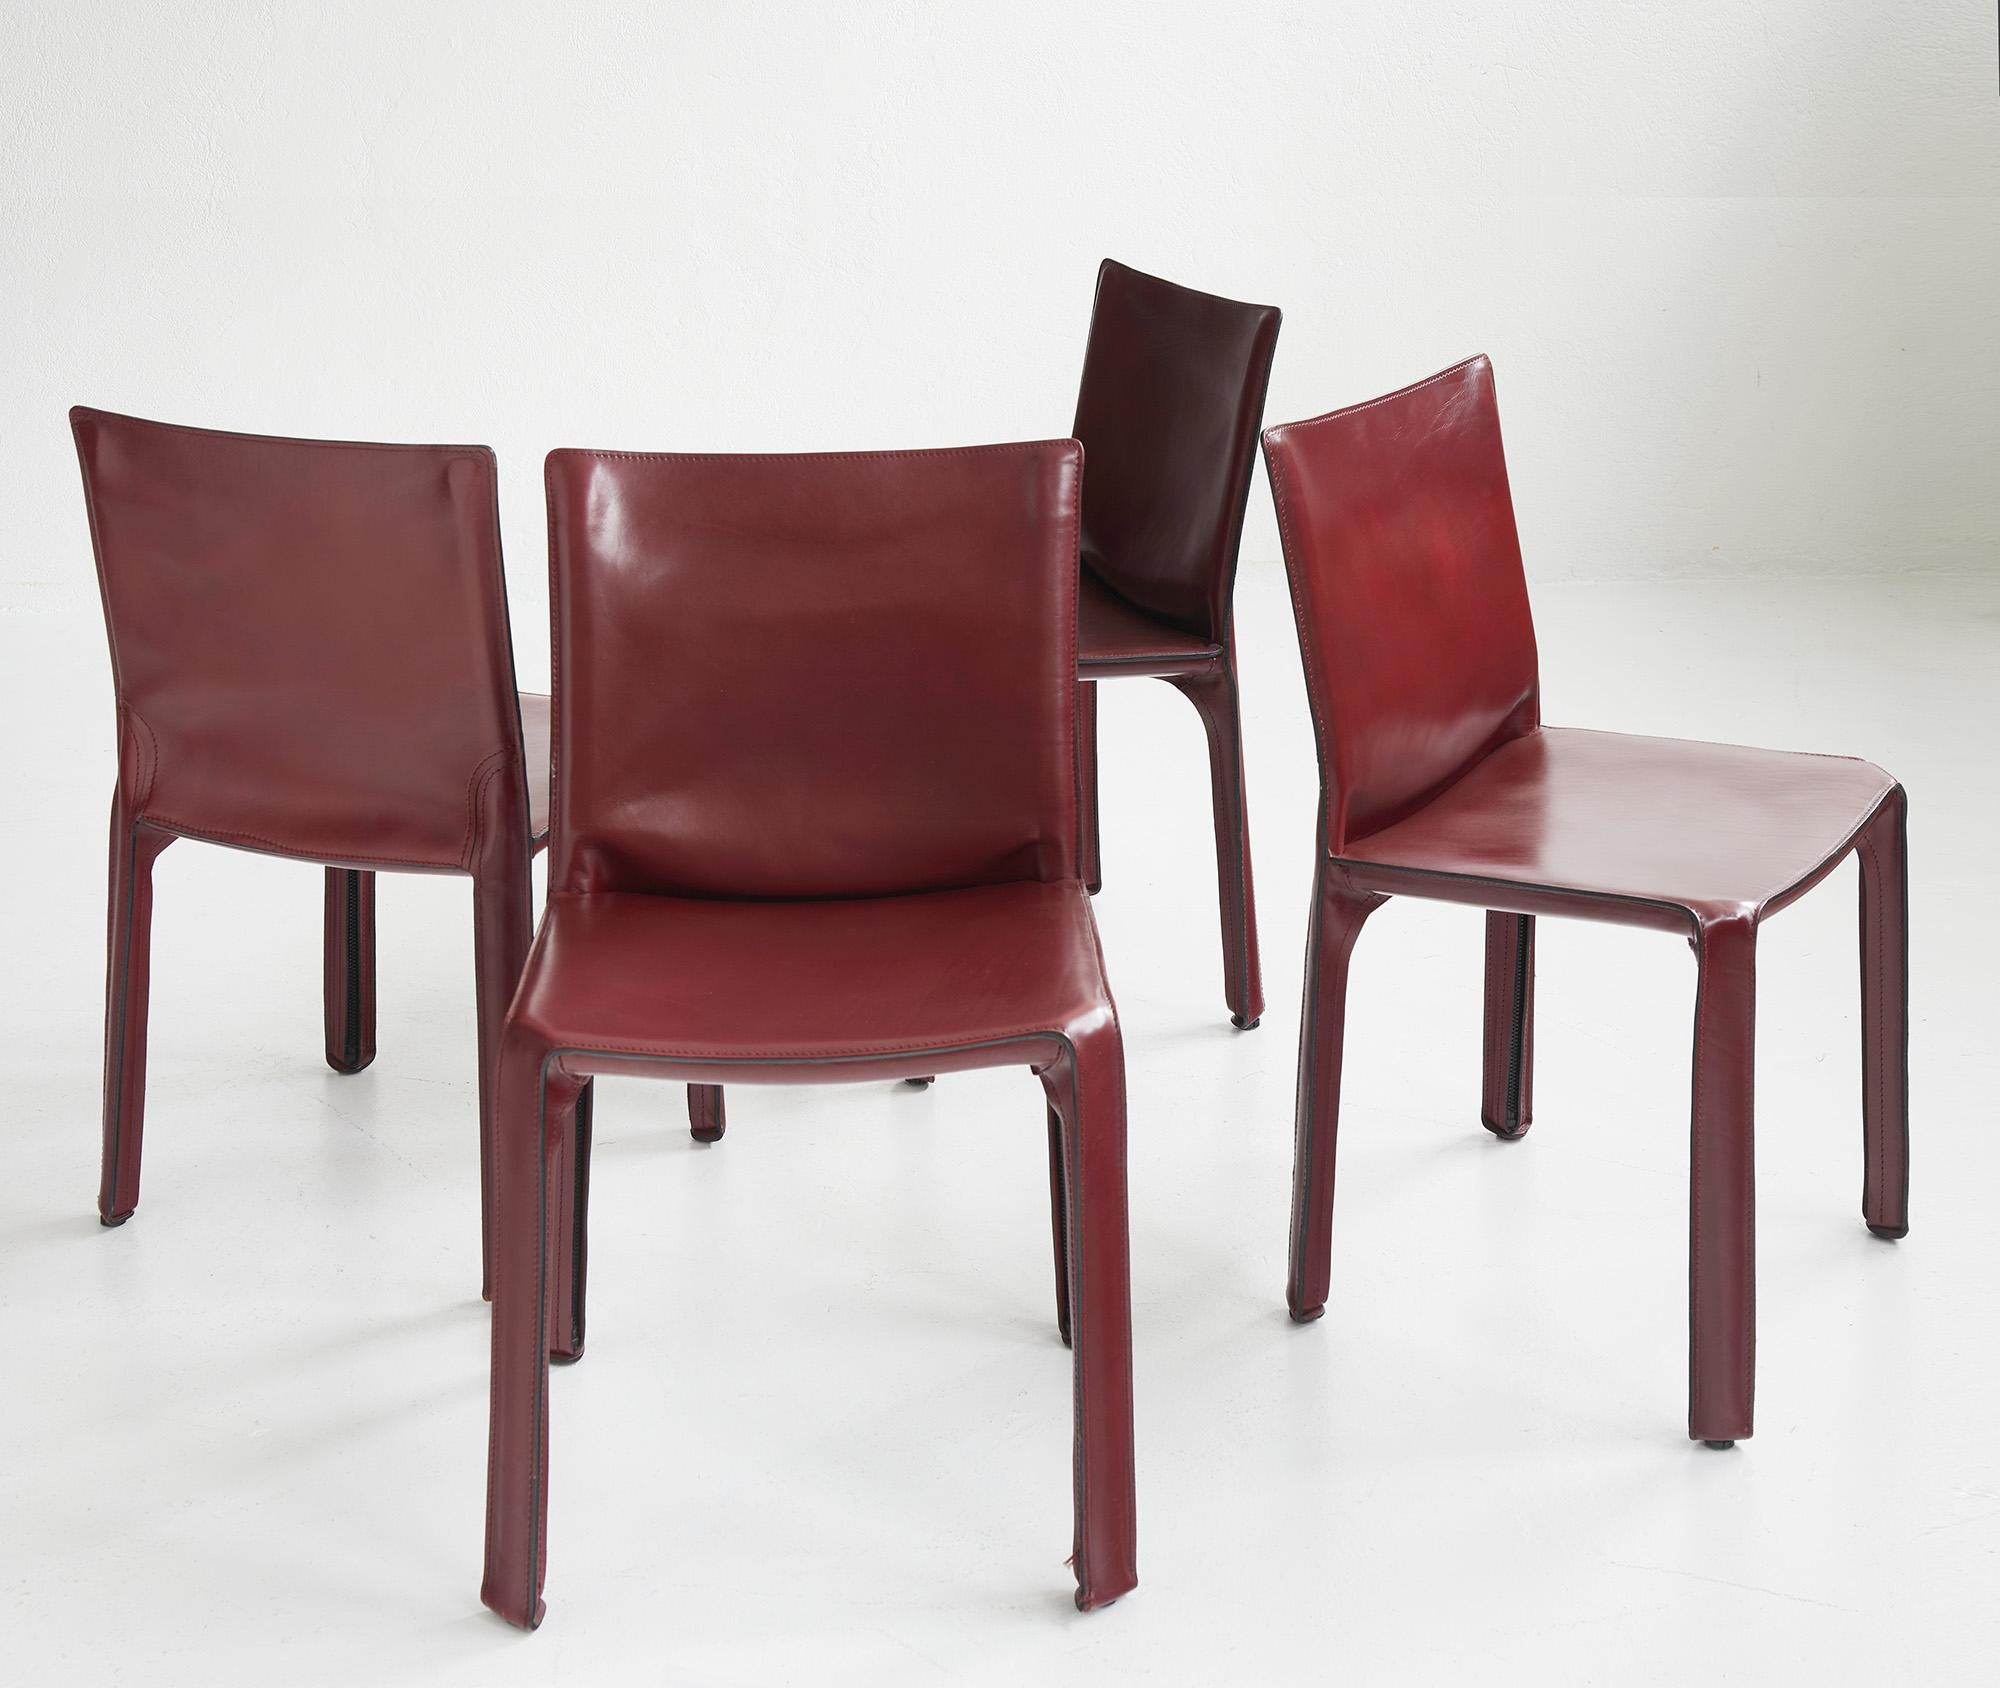 Set of 4 CAB chairs by Mario Bellini by Cassina, Italy 

The CAB 412 is made up of a tubular metal structure covered with a thick saddle-stitched leather cover. The leather follows the shapes of the structure and is held in place by zippers.

This